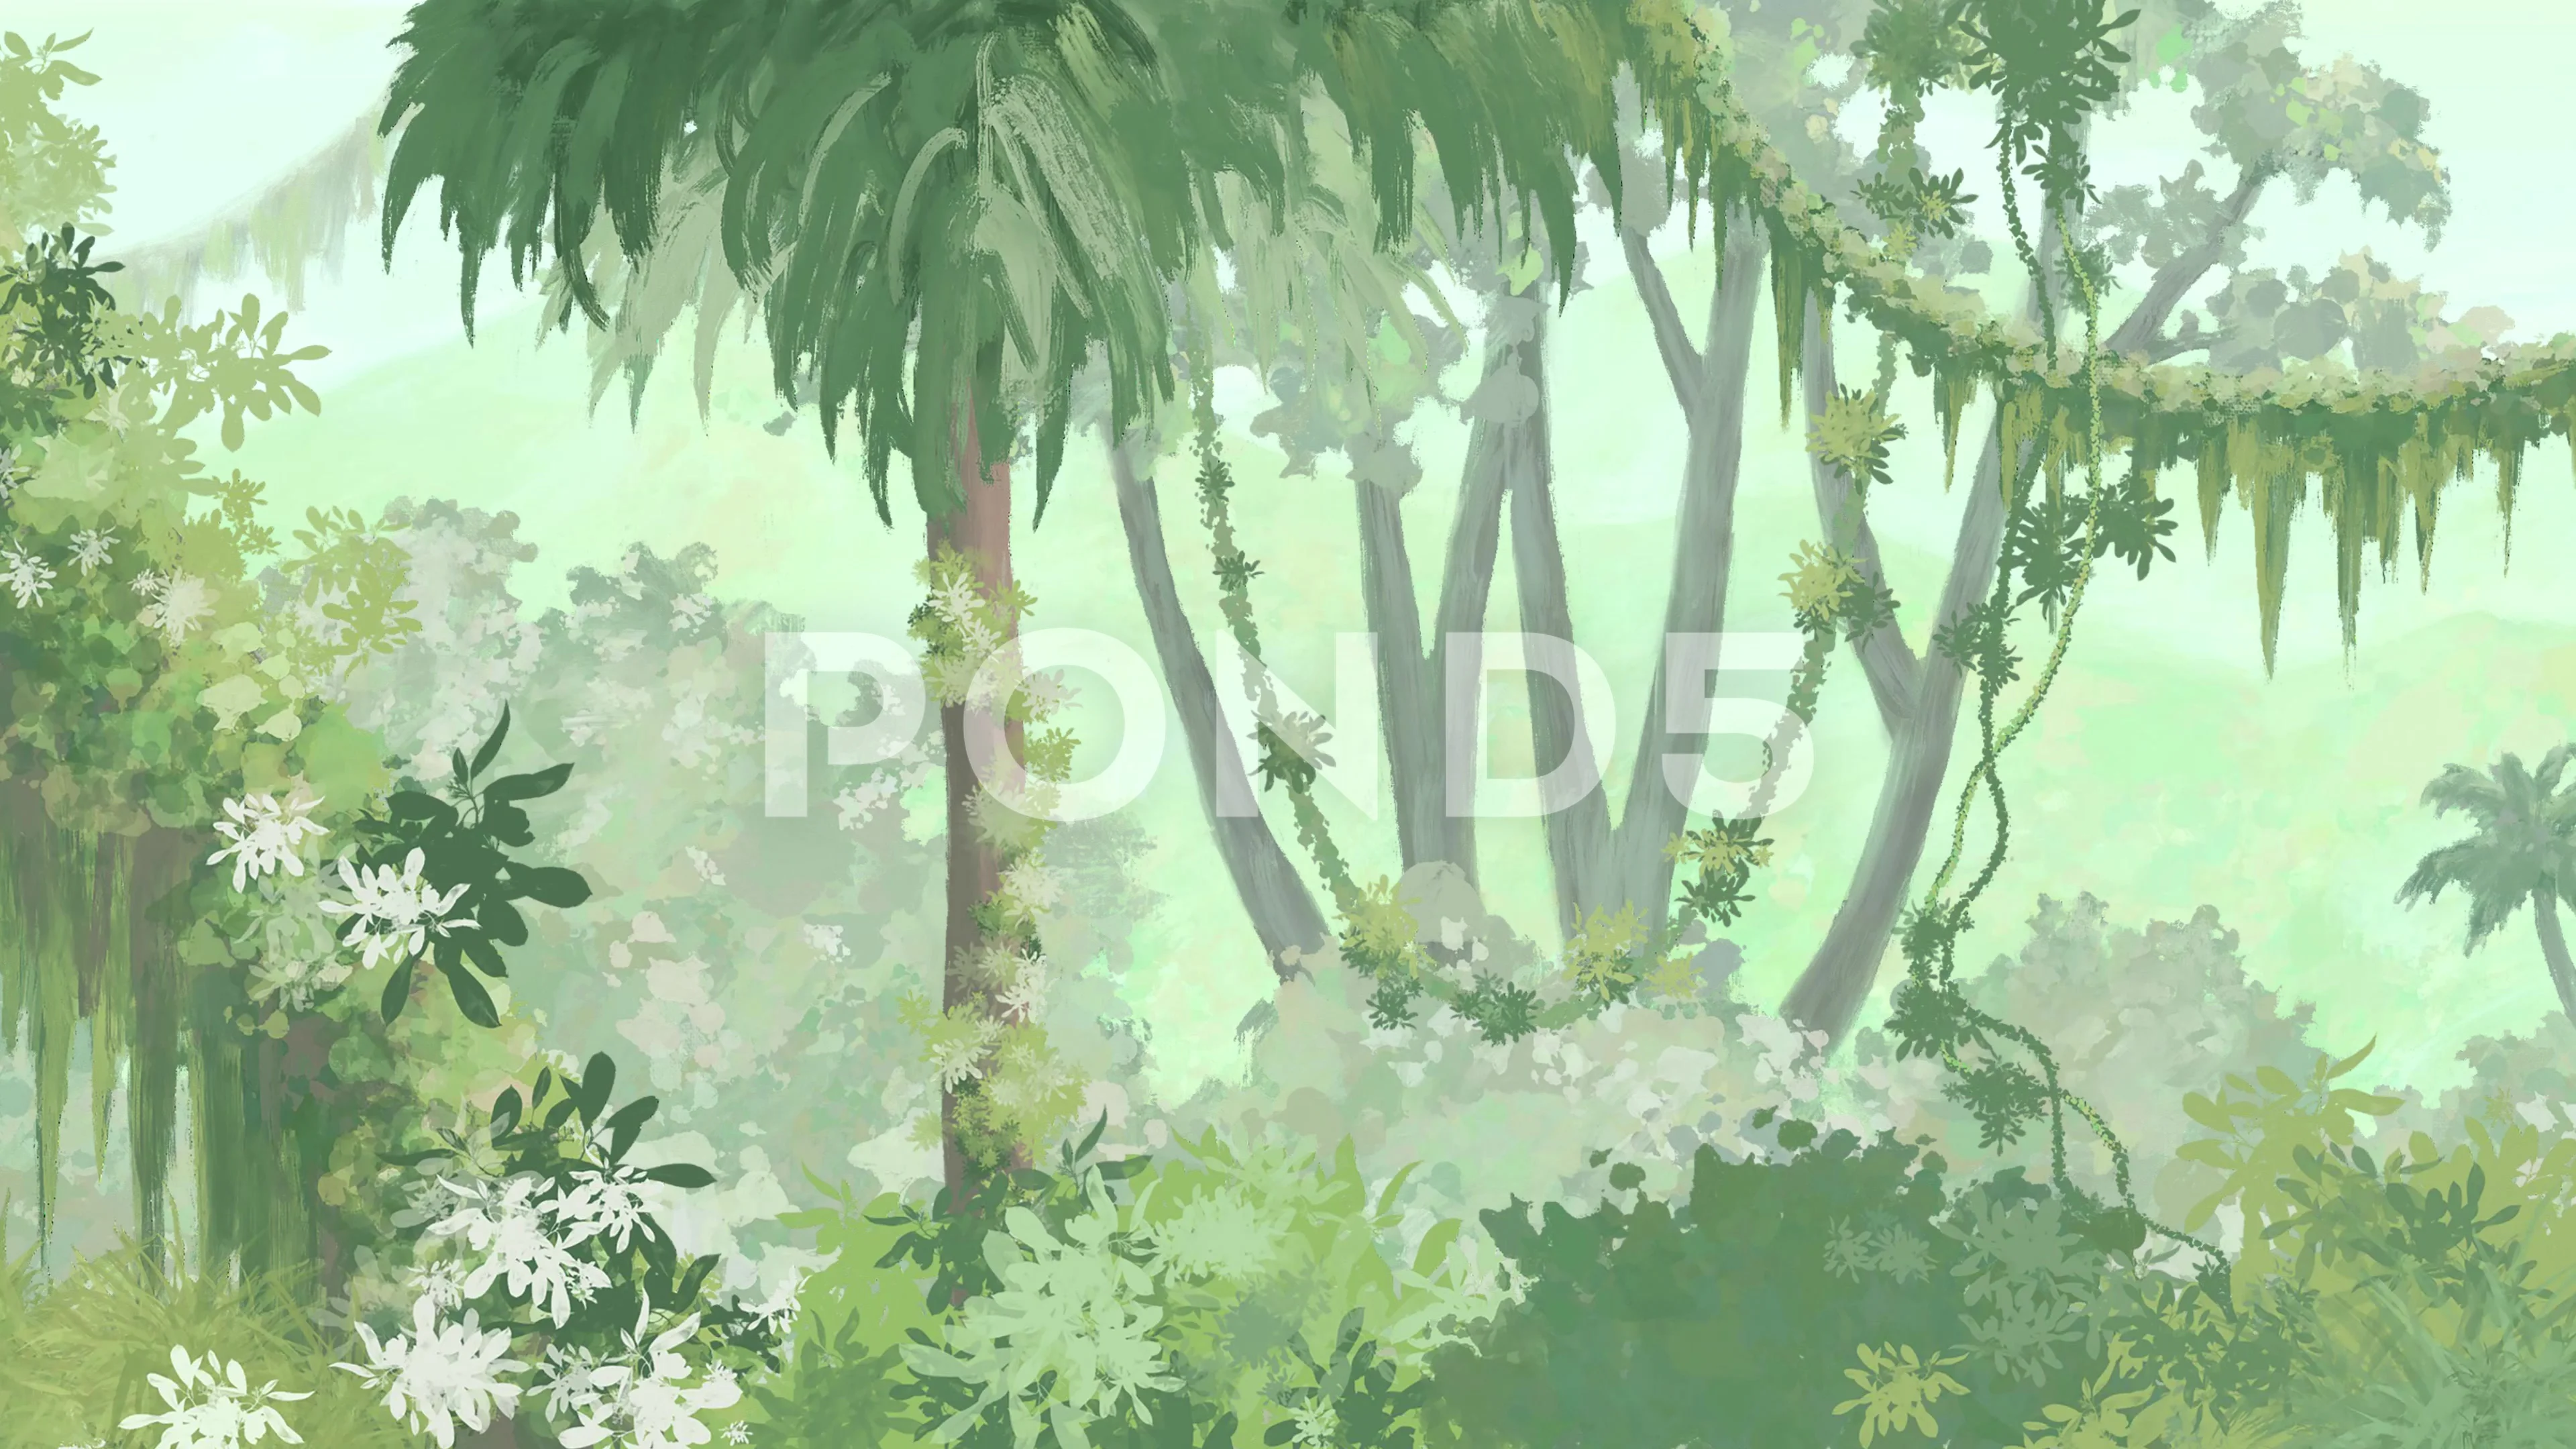 in the jungle - Anime scenery Wallpapers and Images - Desktop Nexus Groups